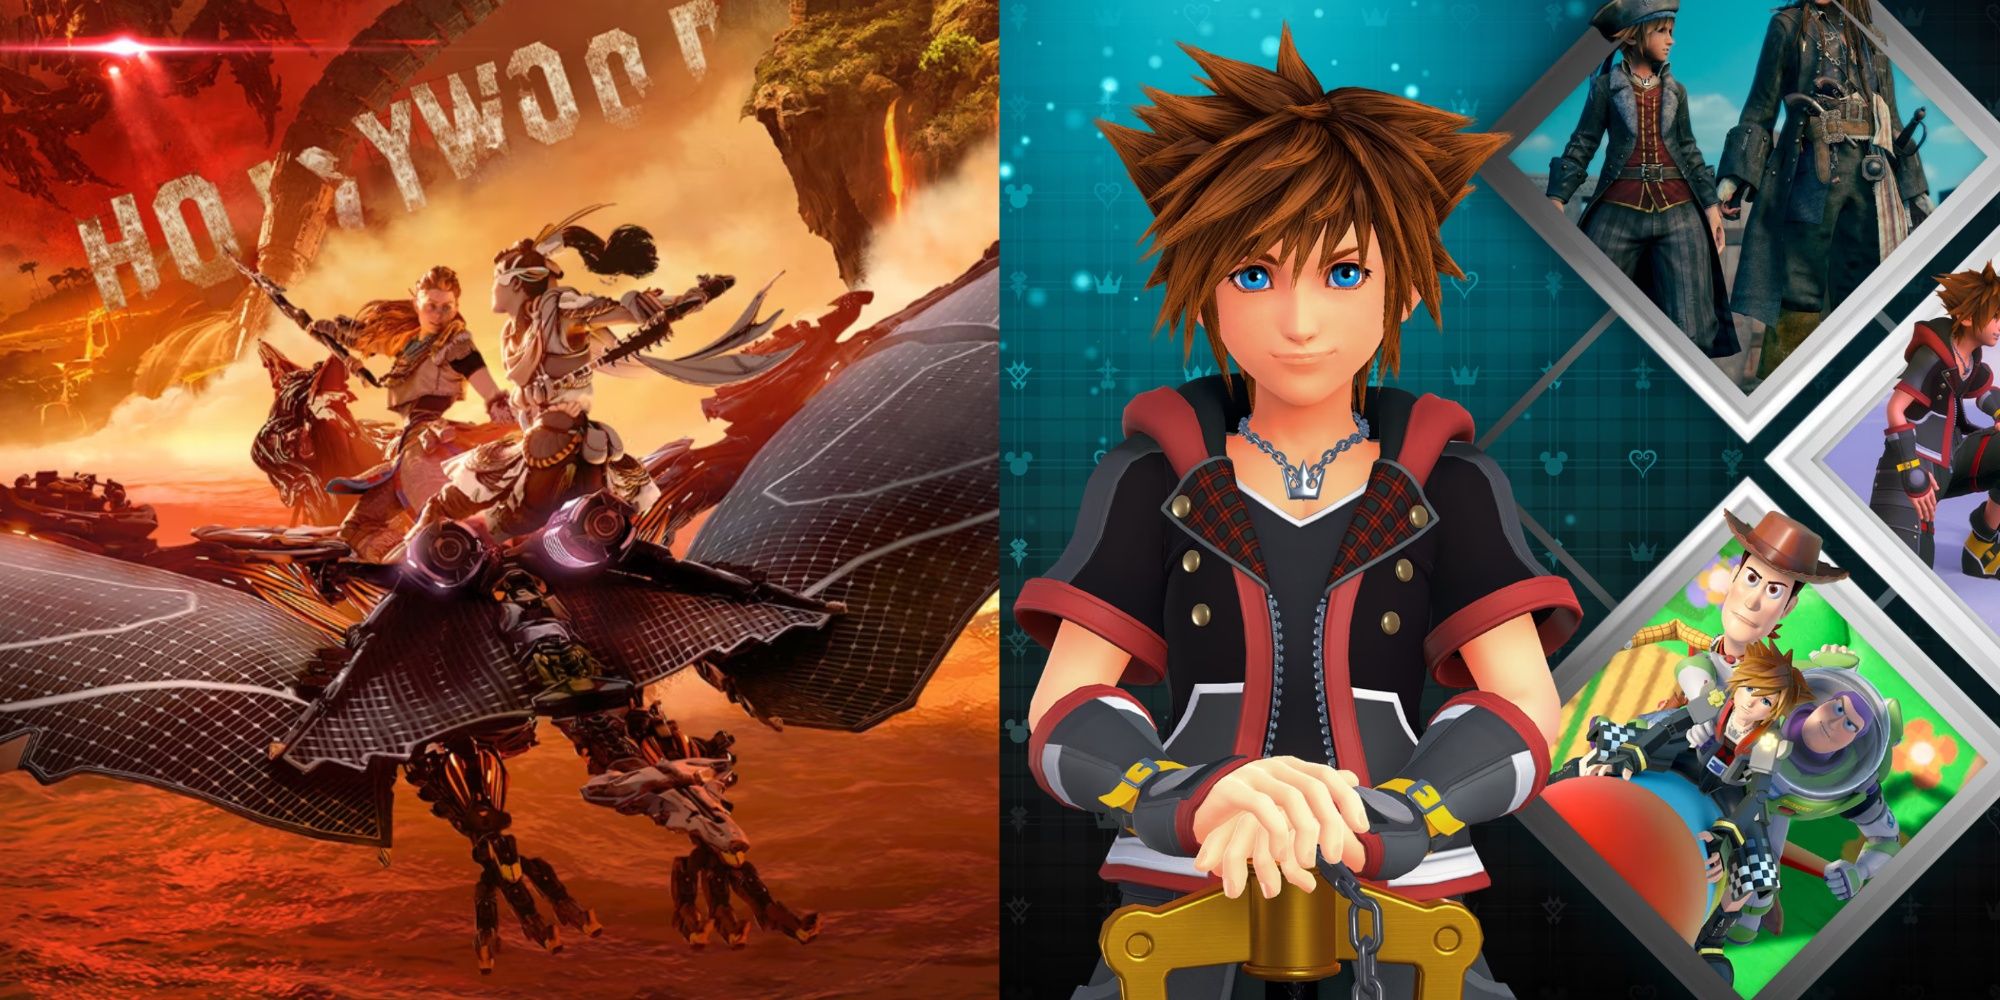 aloy riding a mech in forbidden shores, and sora from kingdom hearts